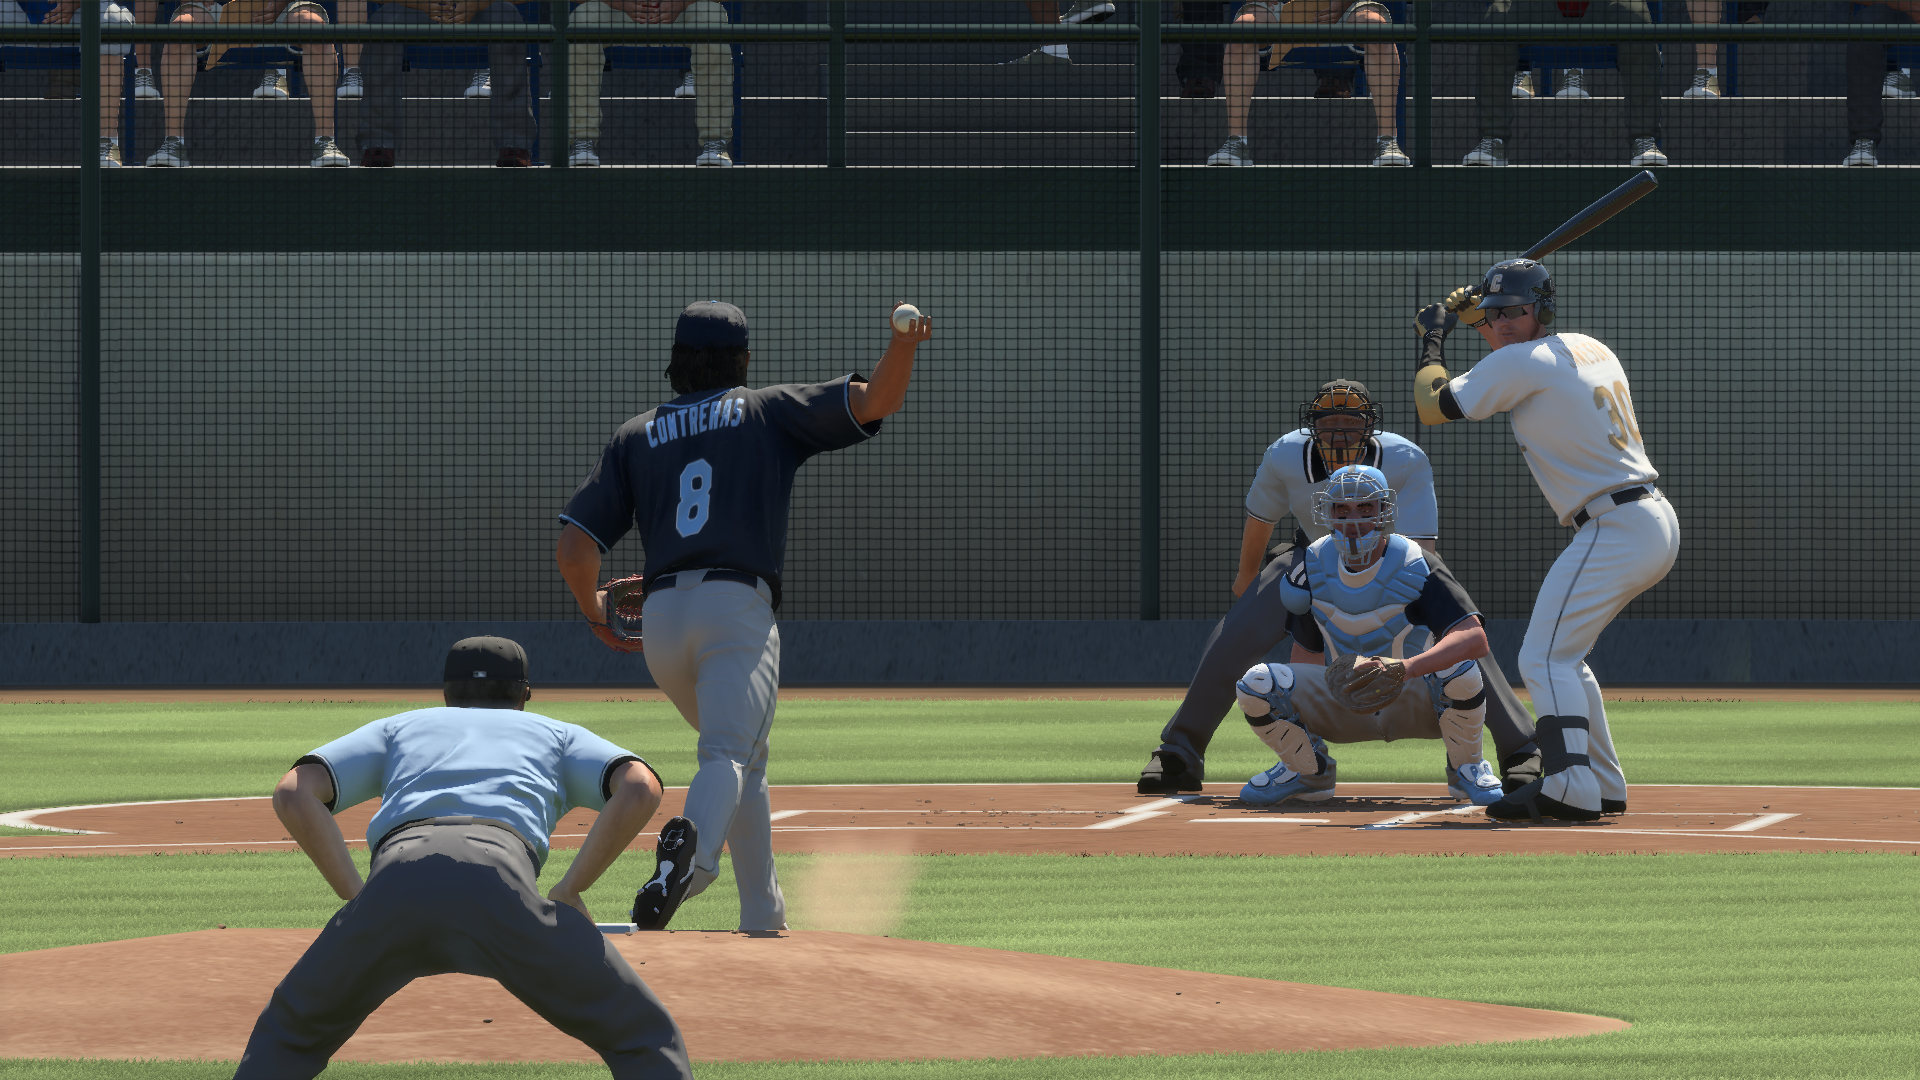 Mlb The Show 16 Review 20